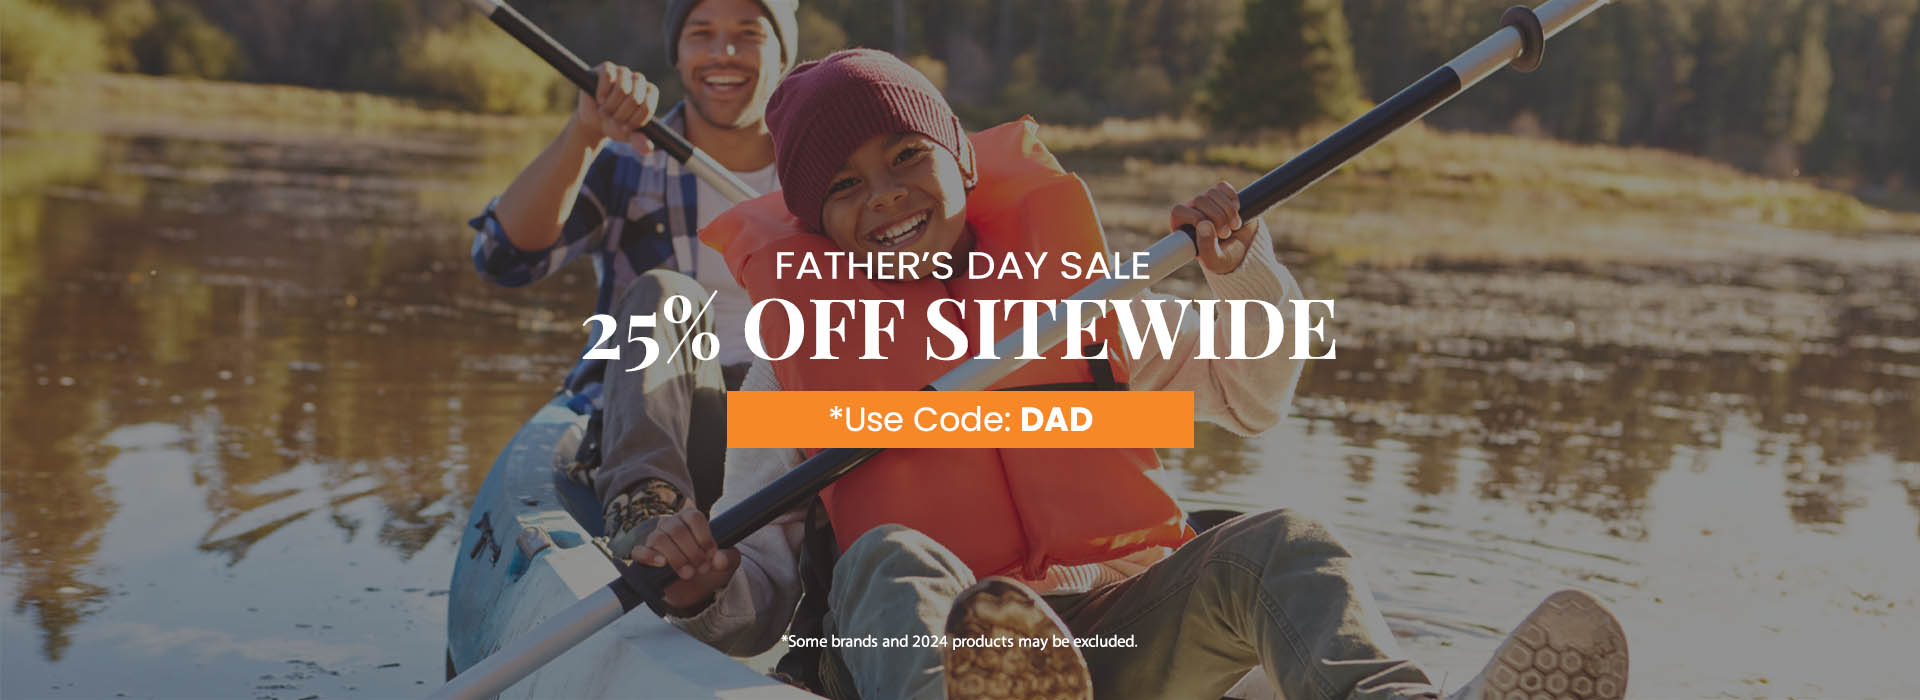 Father's Day Sale. Use Code: DAD At Checkout!